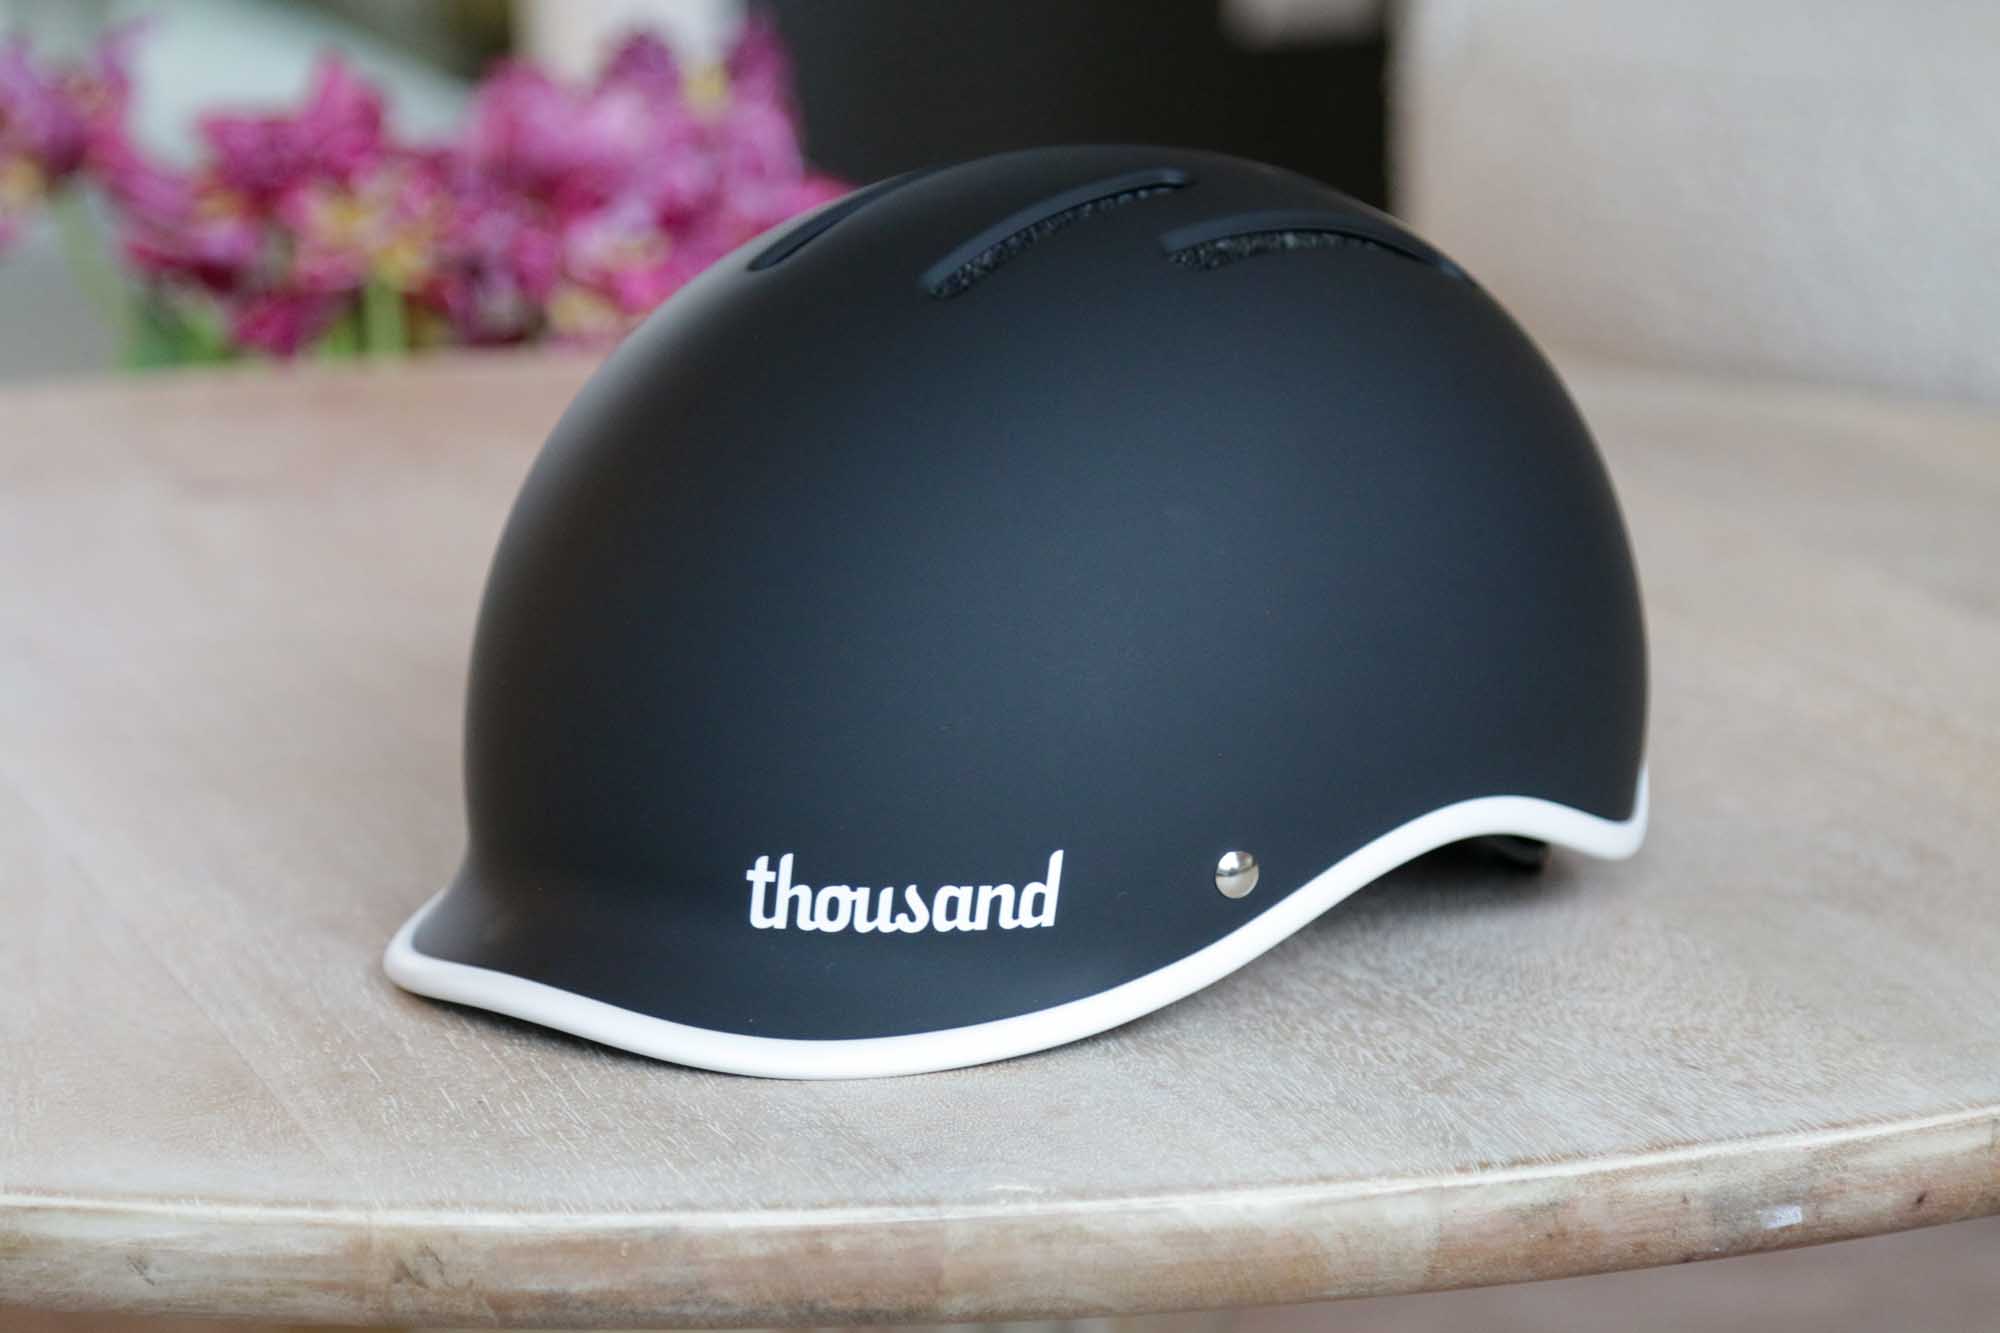 The New Thousand Heritage 2.0 Helmet Visible, Fits More Diverse Riders - Bikerumor